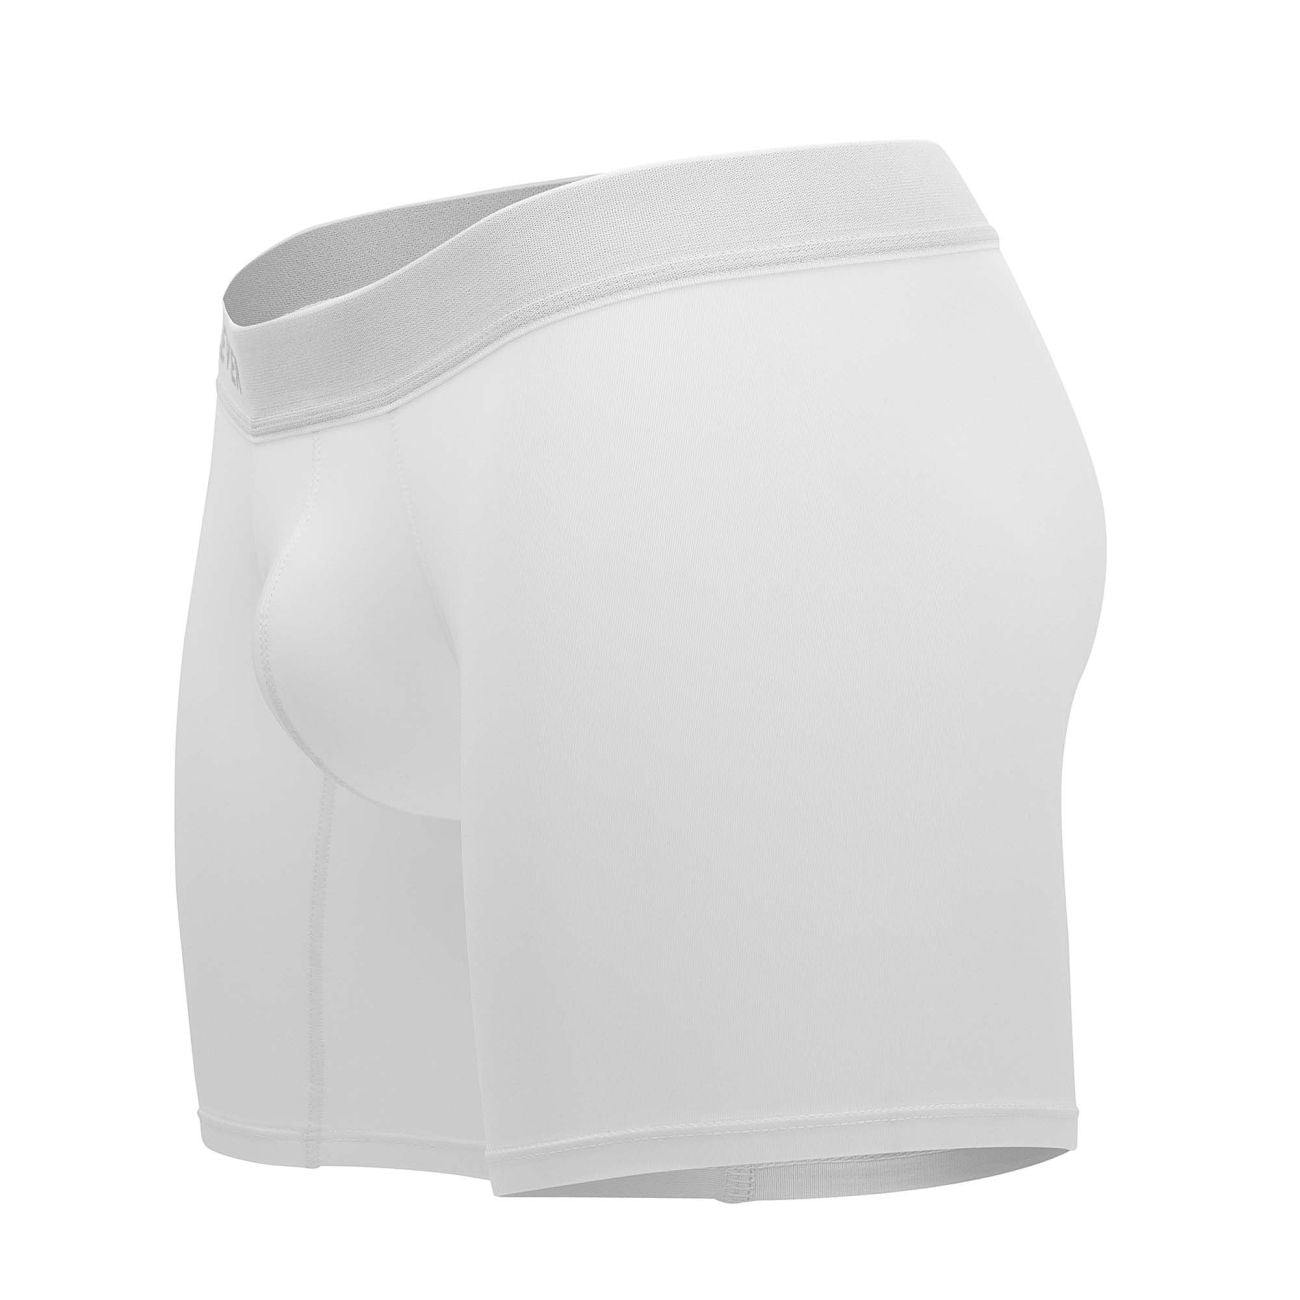 Clever 0885 Match Boxer Briefs White